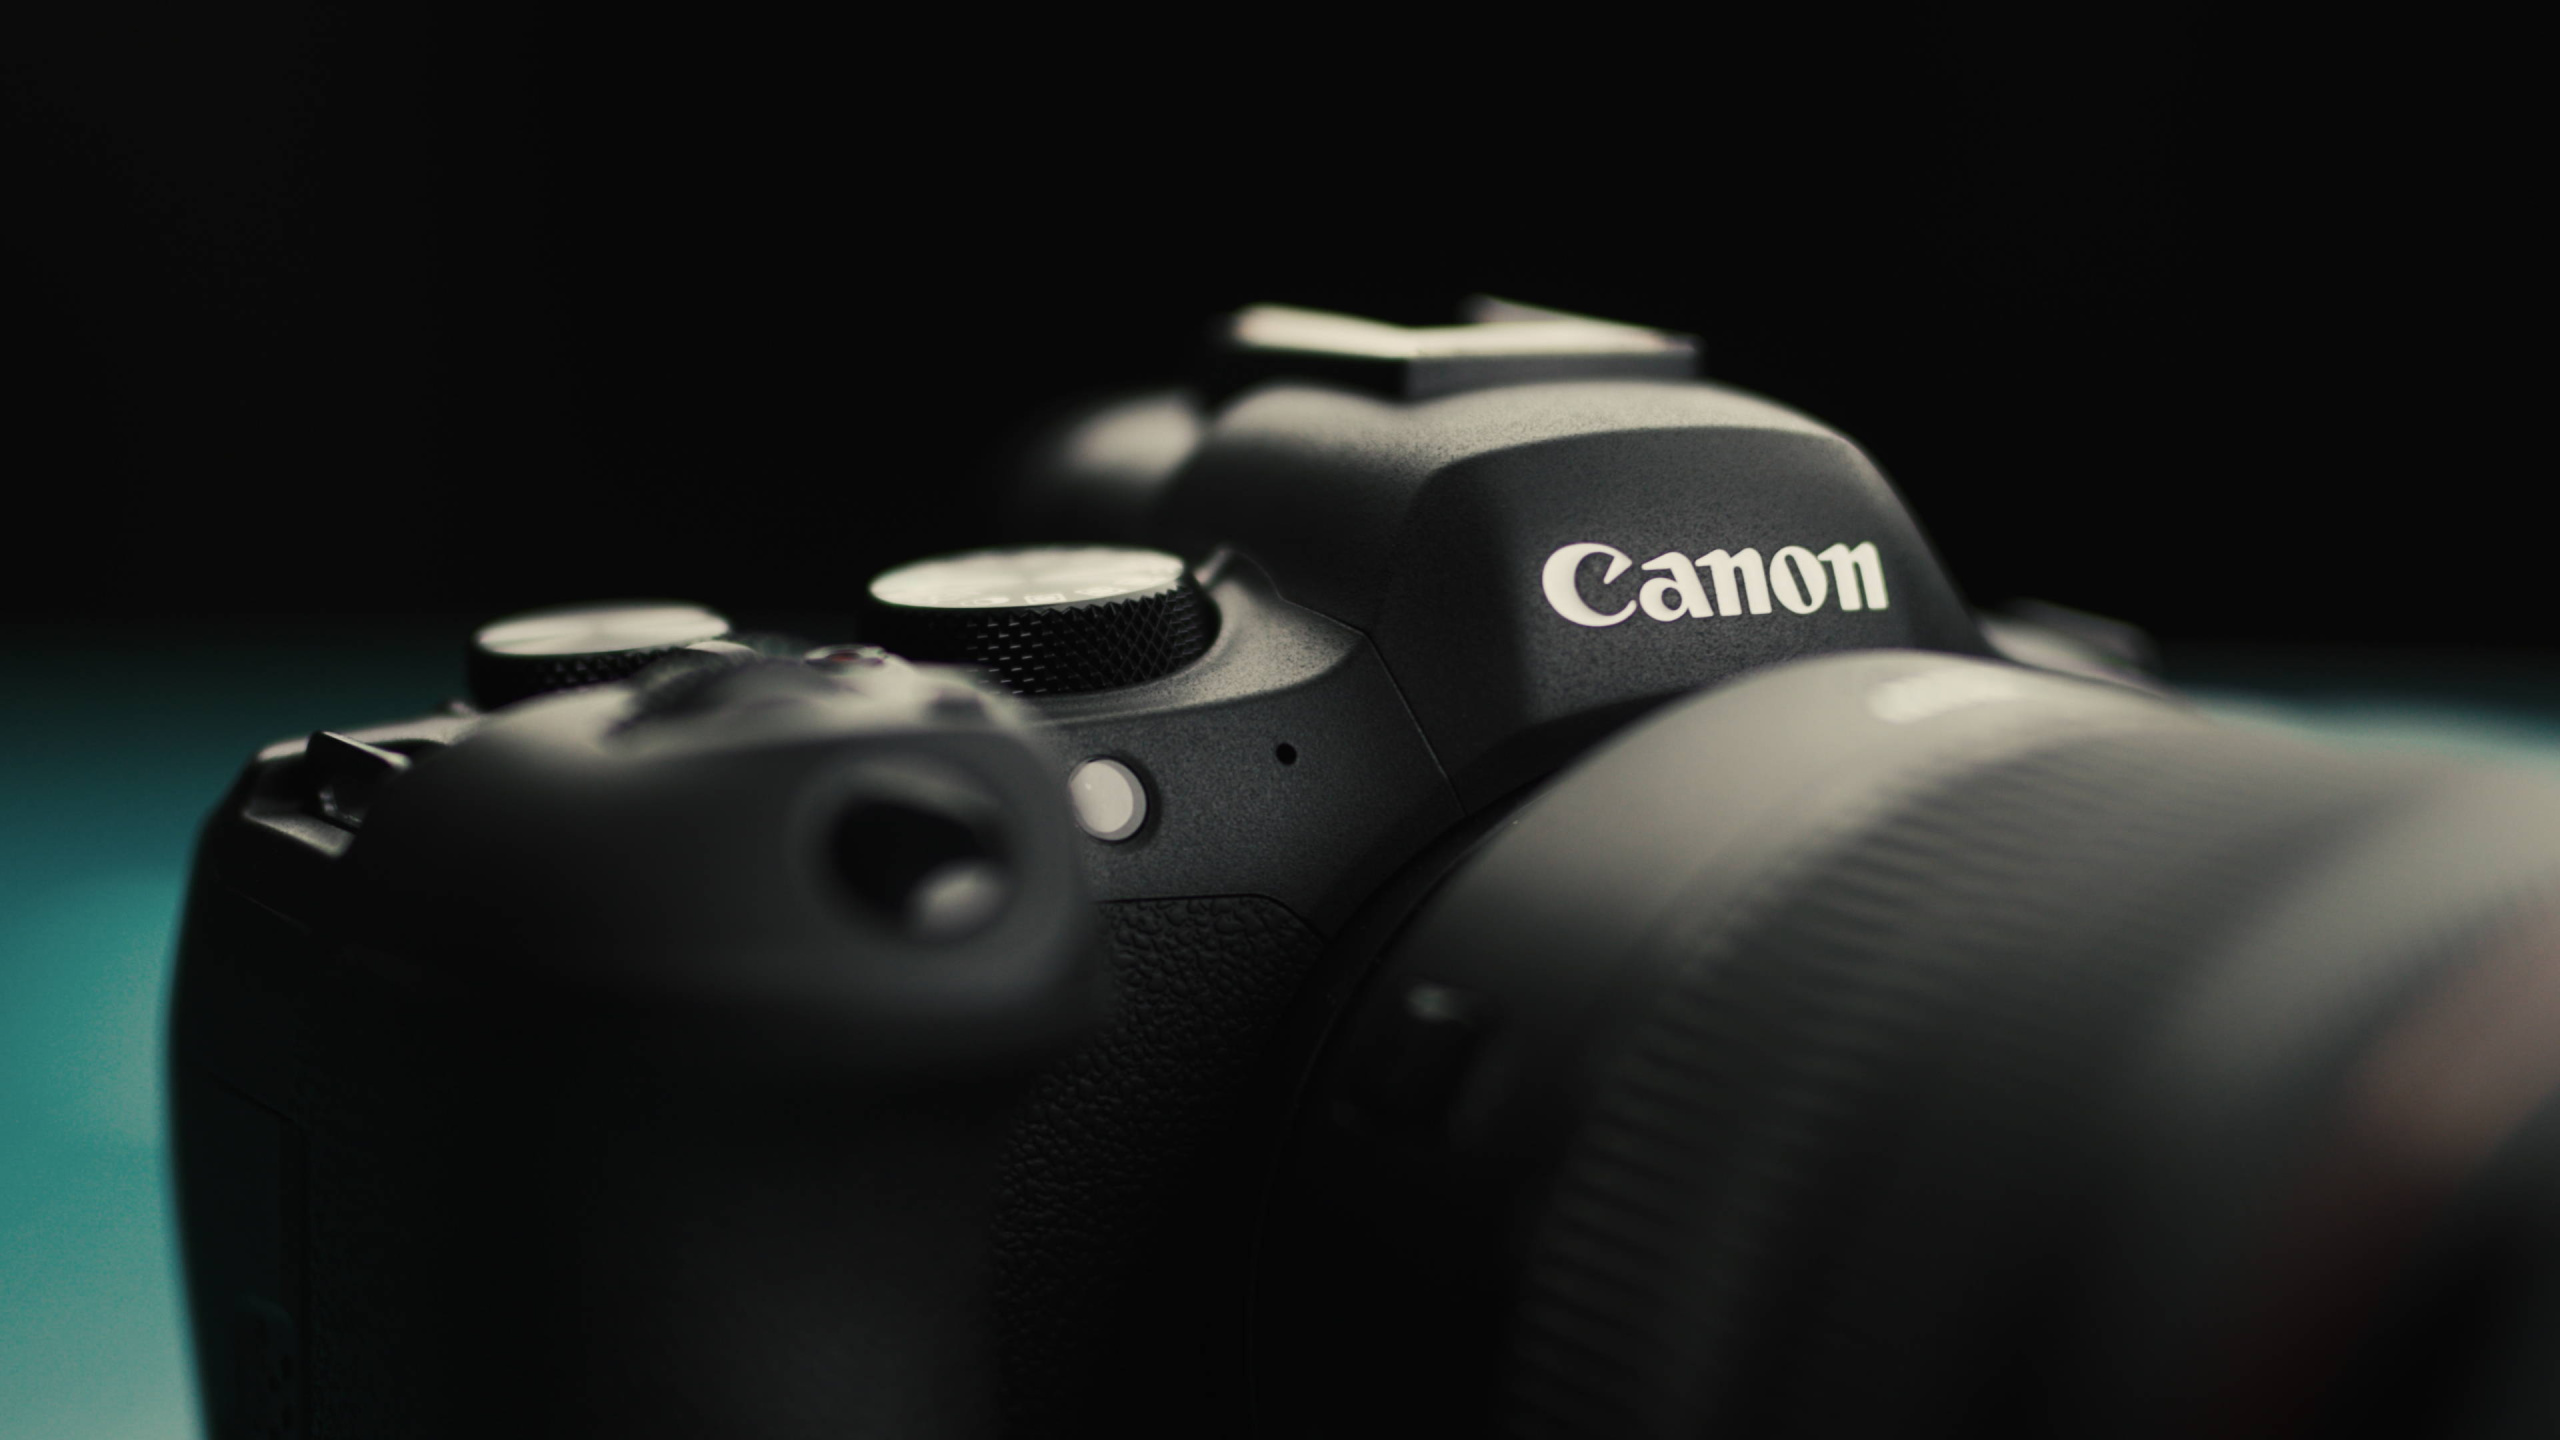 Canon remains the undisputed leader in the camera market, surpassing Nikon and Sony by a significant margin.